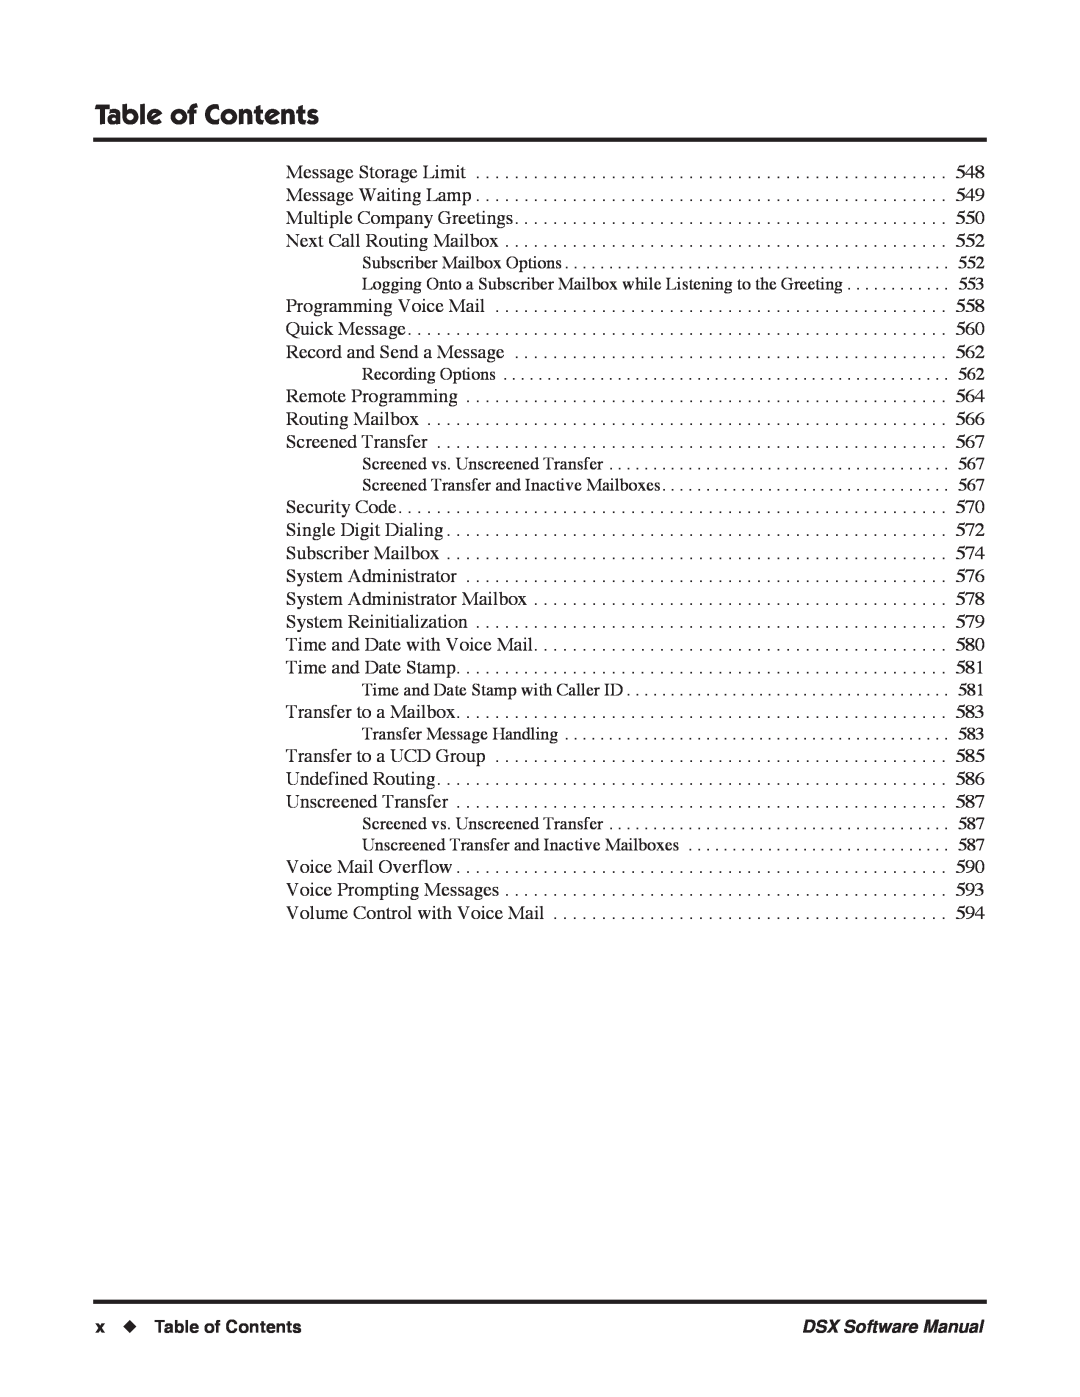 NEC N 1093100, P software manual x Table of Contents 